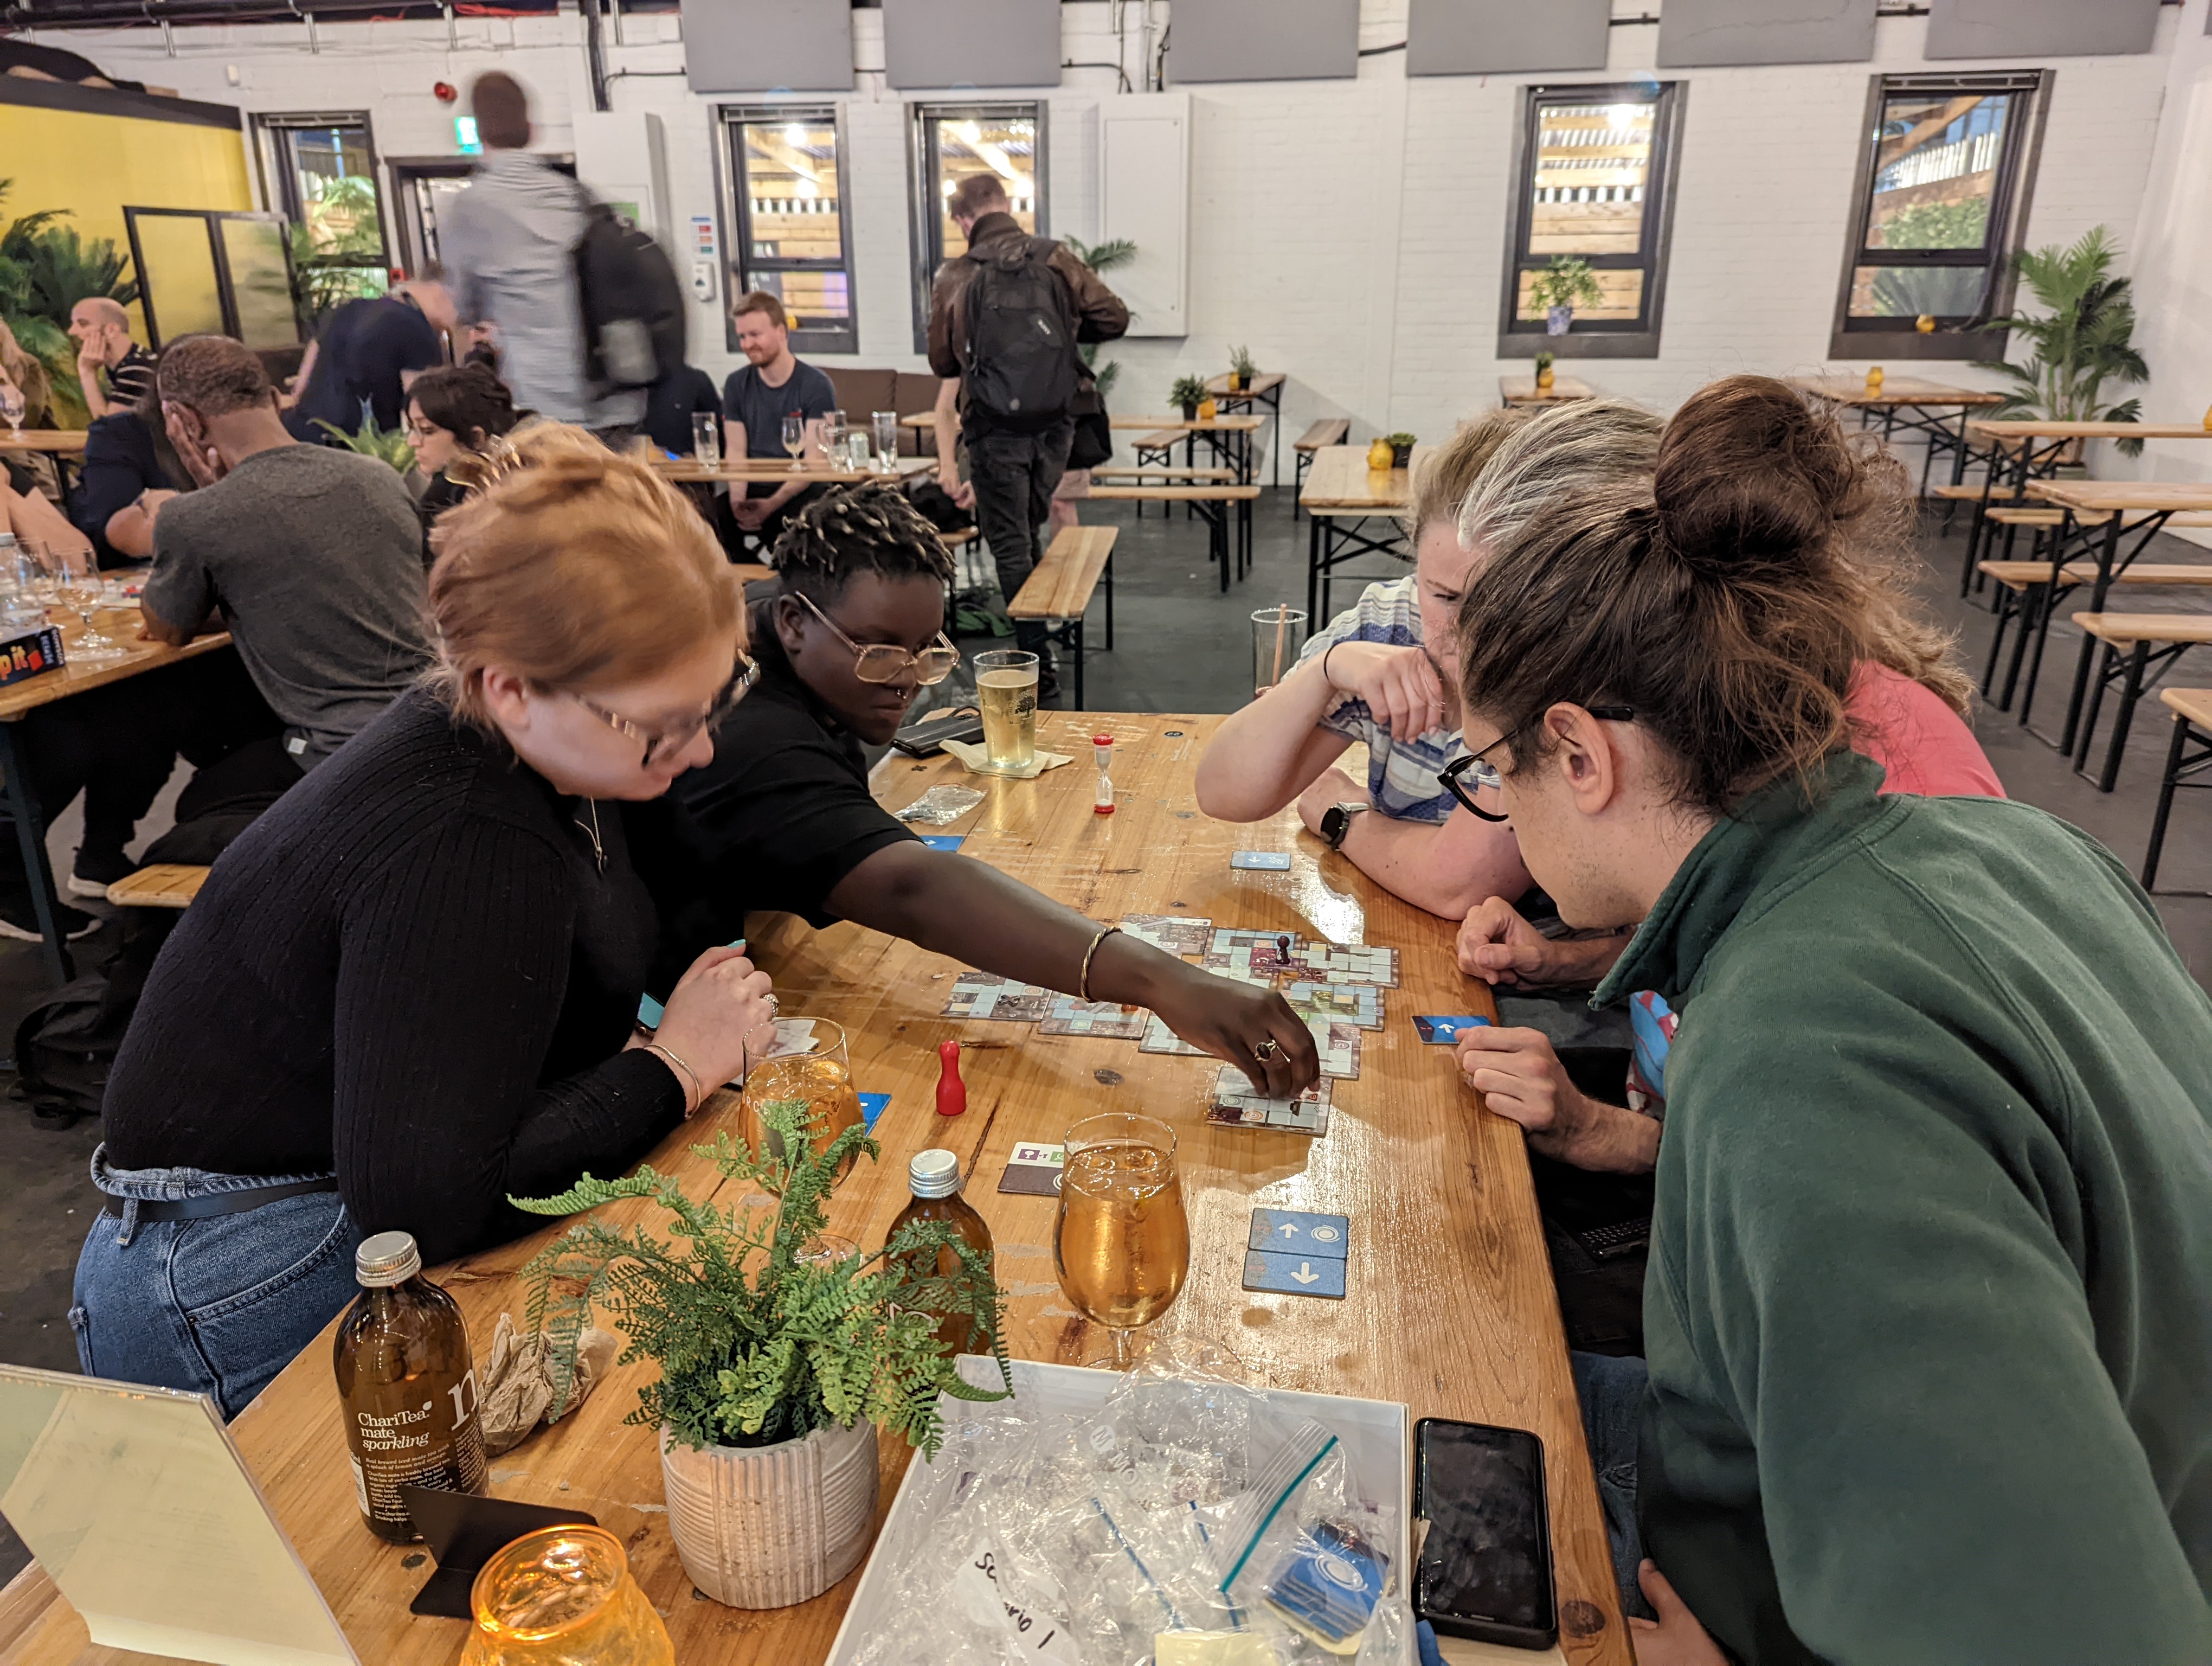 Players are seated round a large table. They are leaning in, all focussed on the board game they are playing. One player is leaning across and moving a piece. 